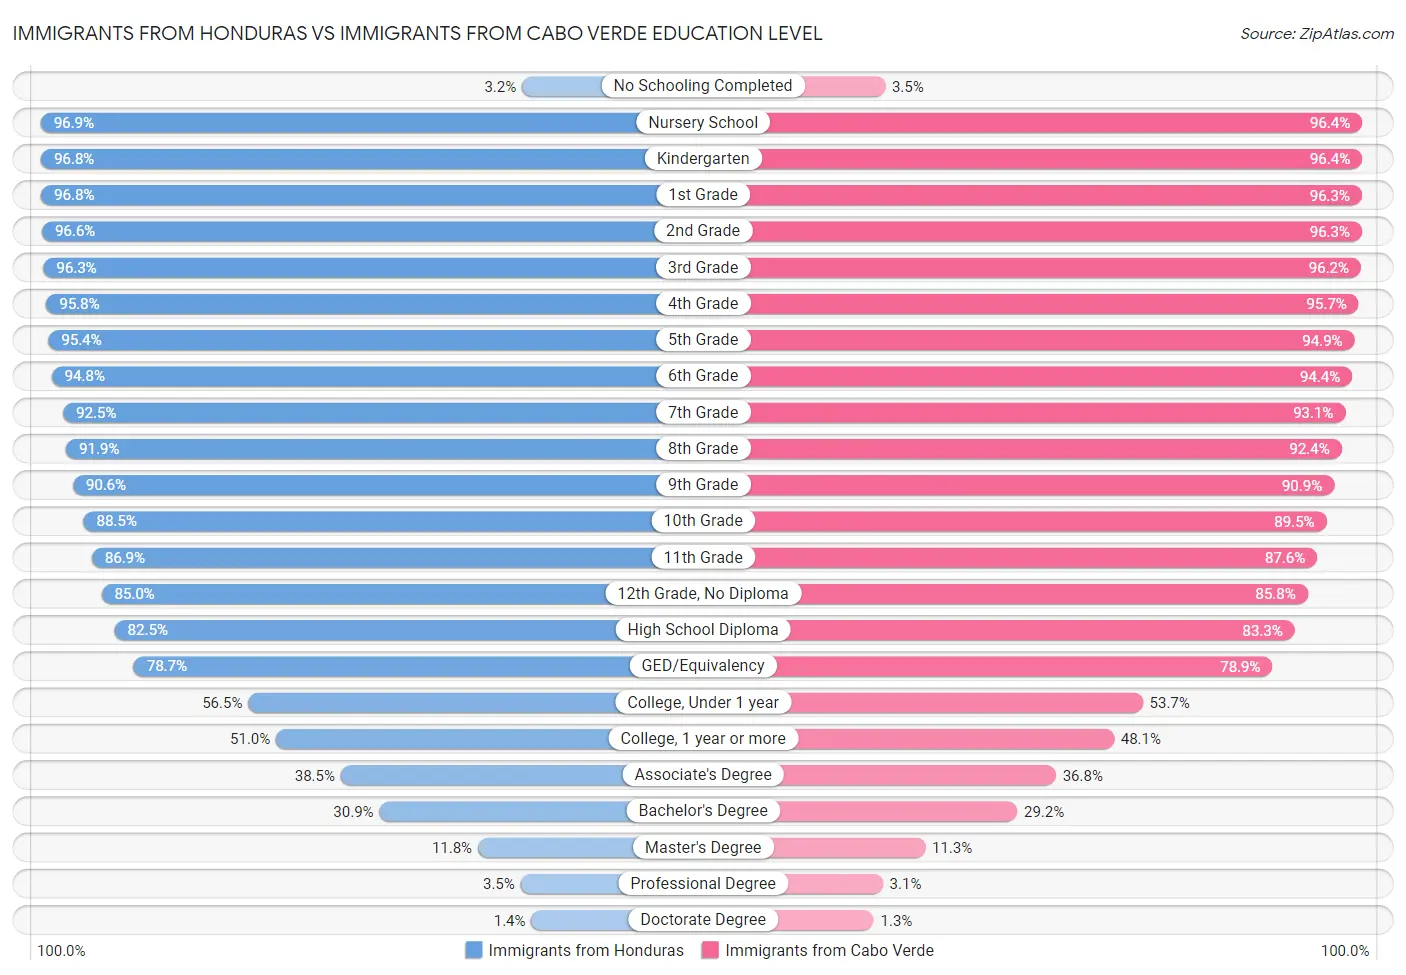 Immigrants from Honduras vs Immigrants from Cabo Verde Education Level